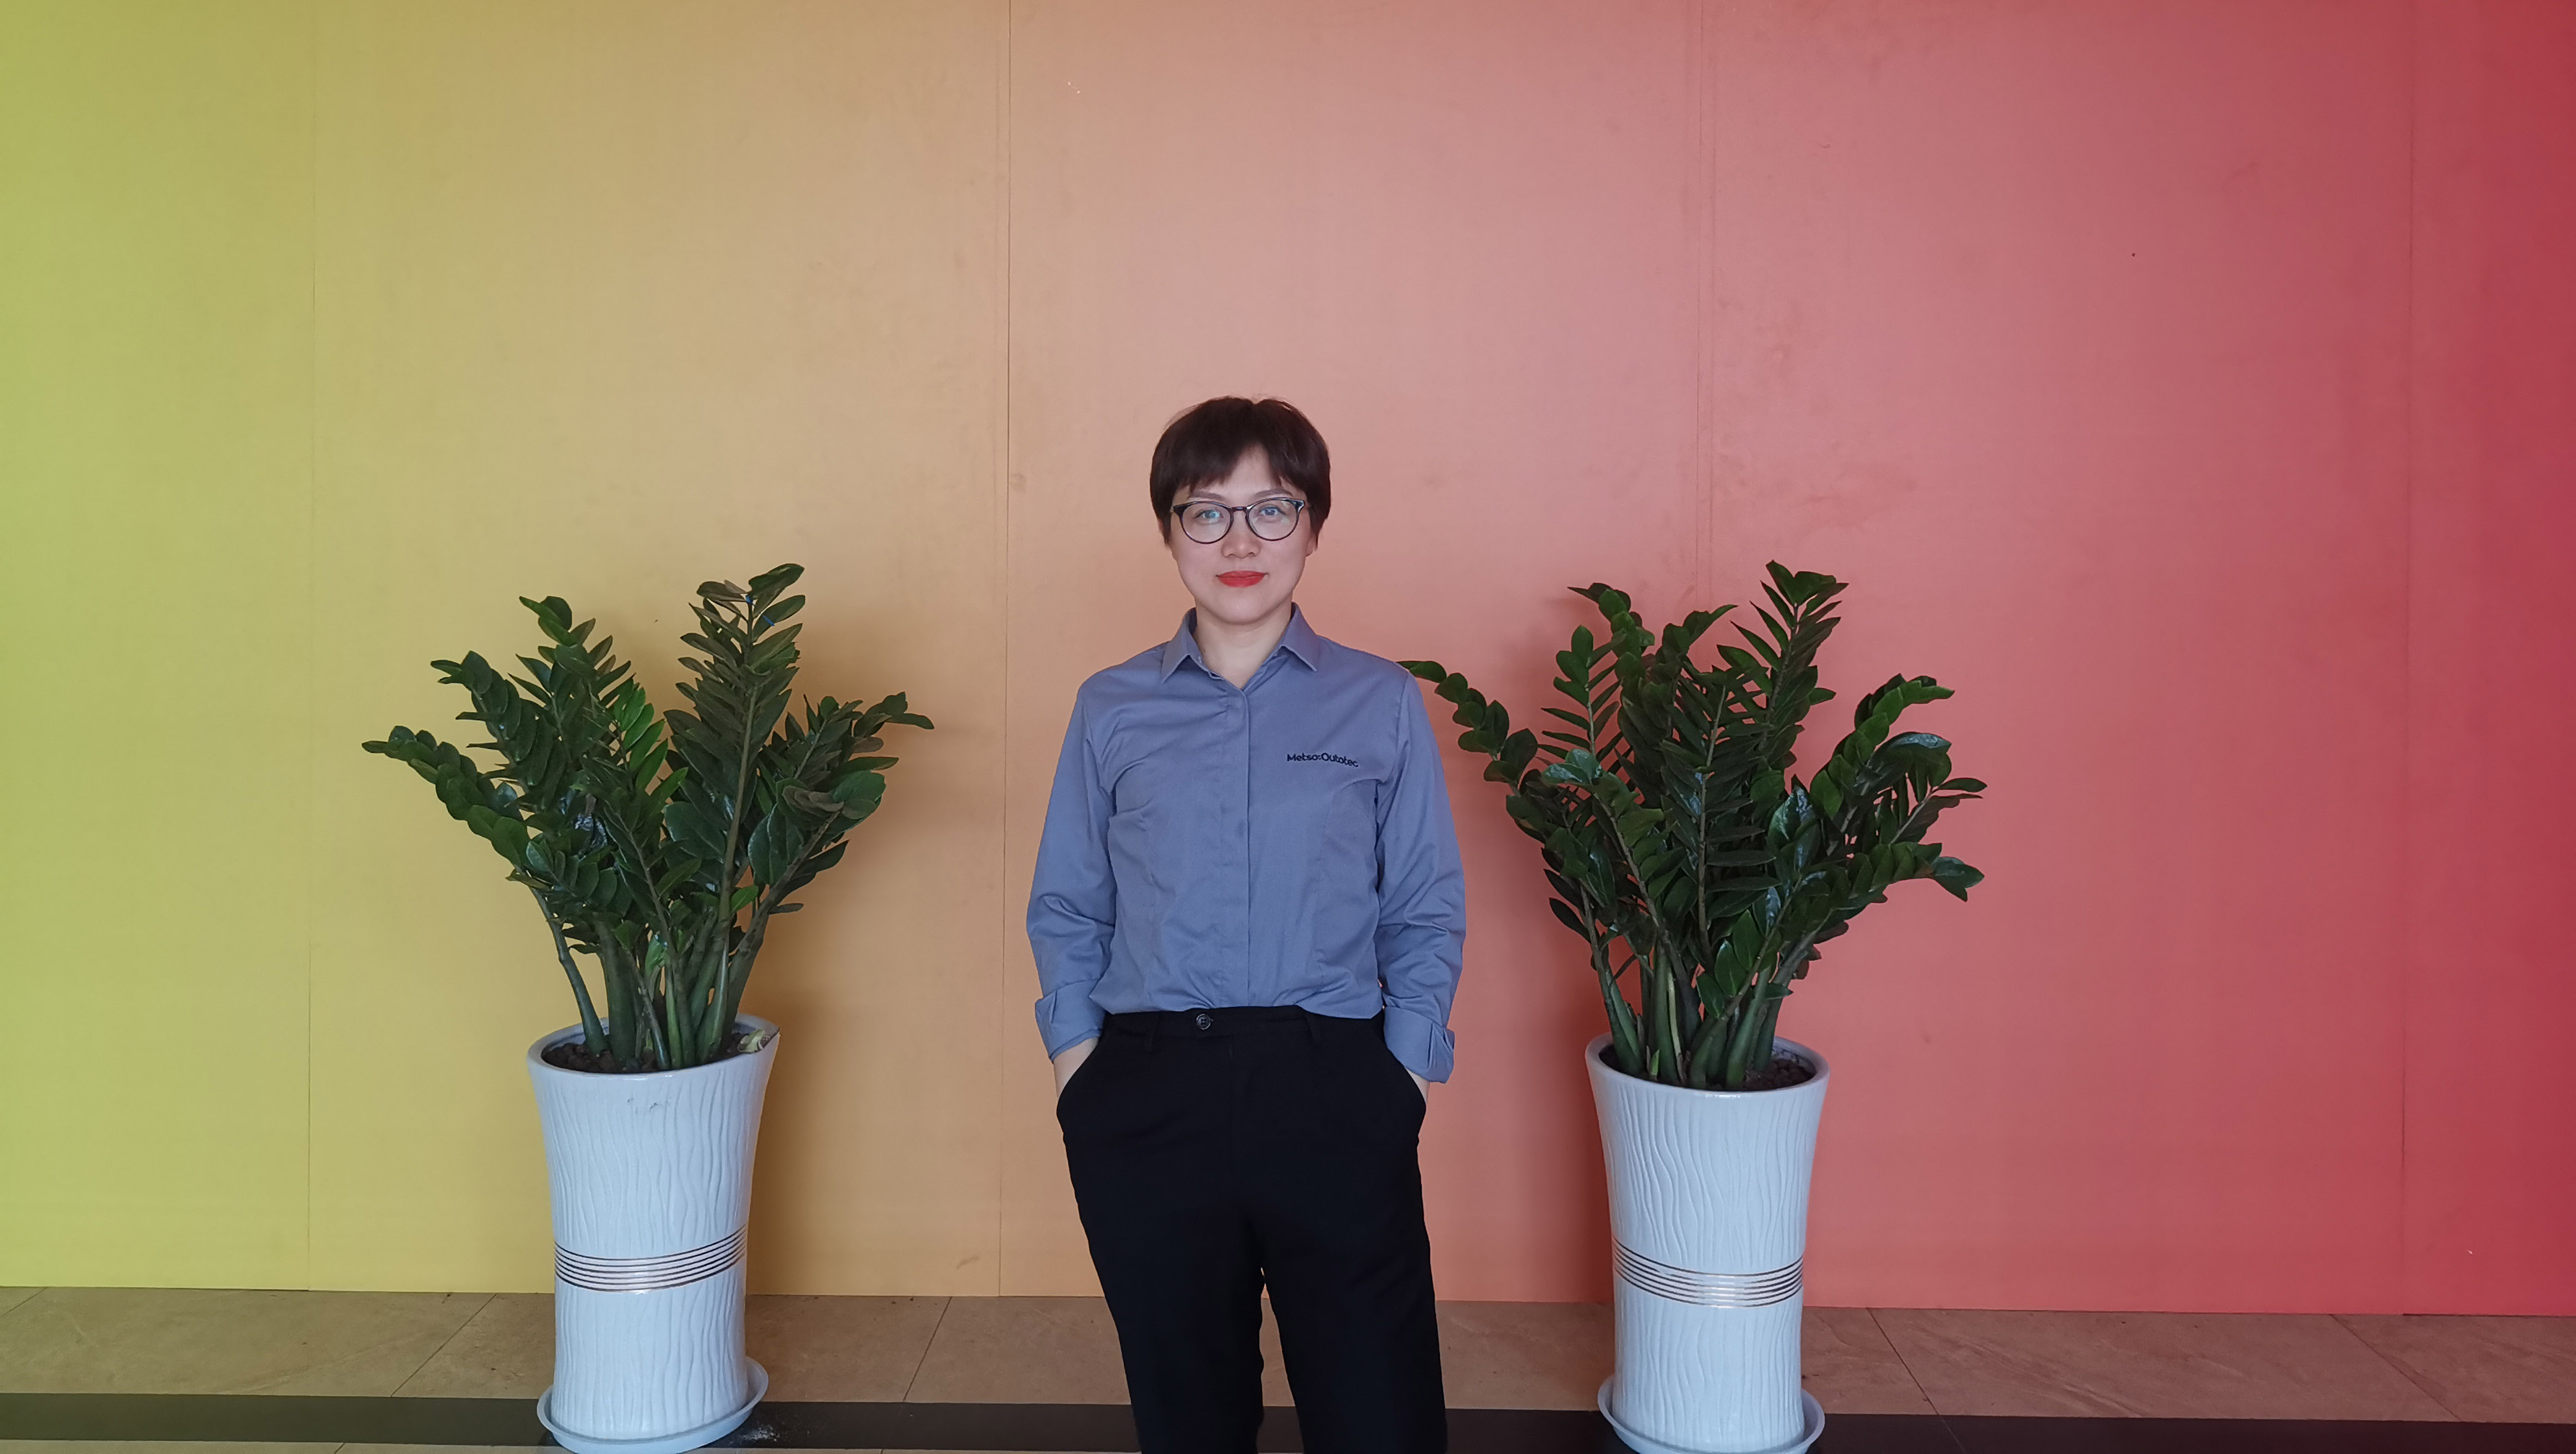 Helen Wu works as a Focused Foundry Manager for Metso Outotec in Quzhou Foundry in China